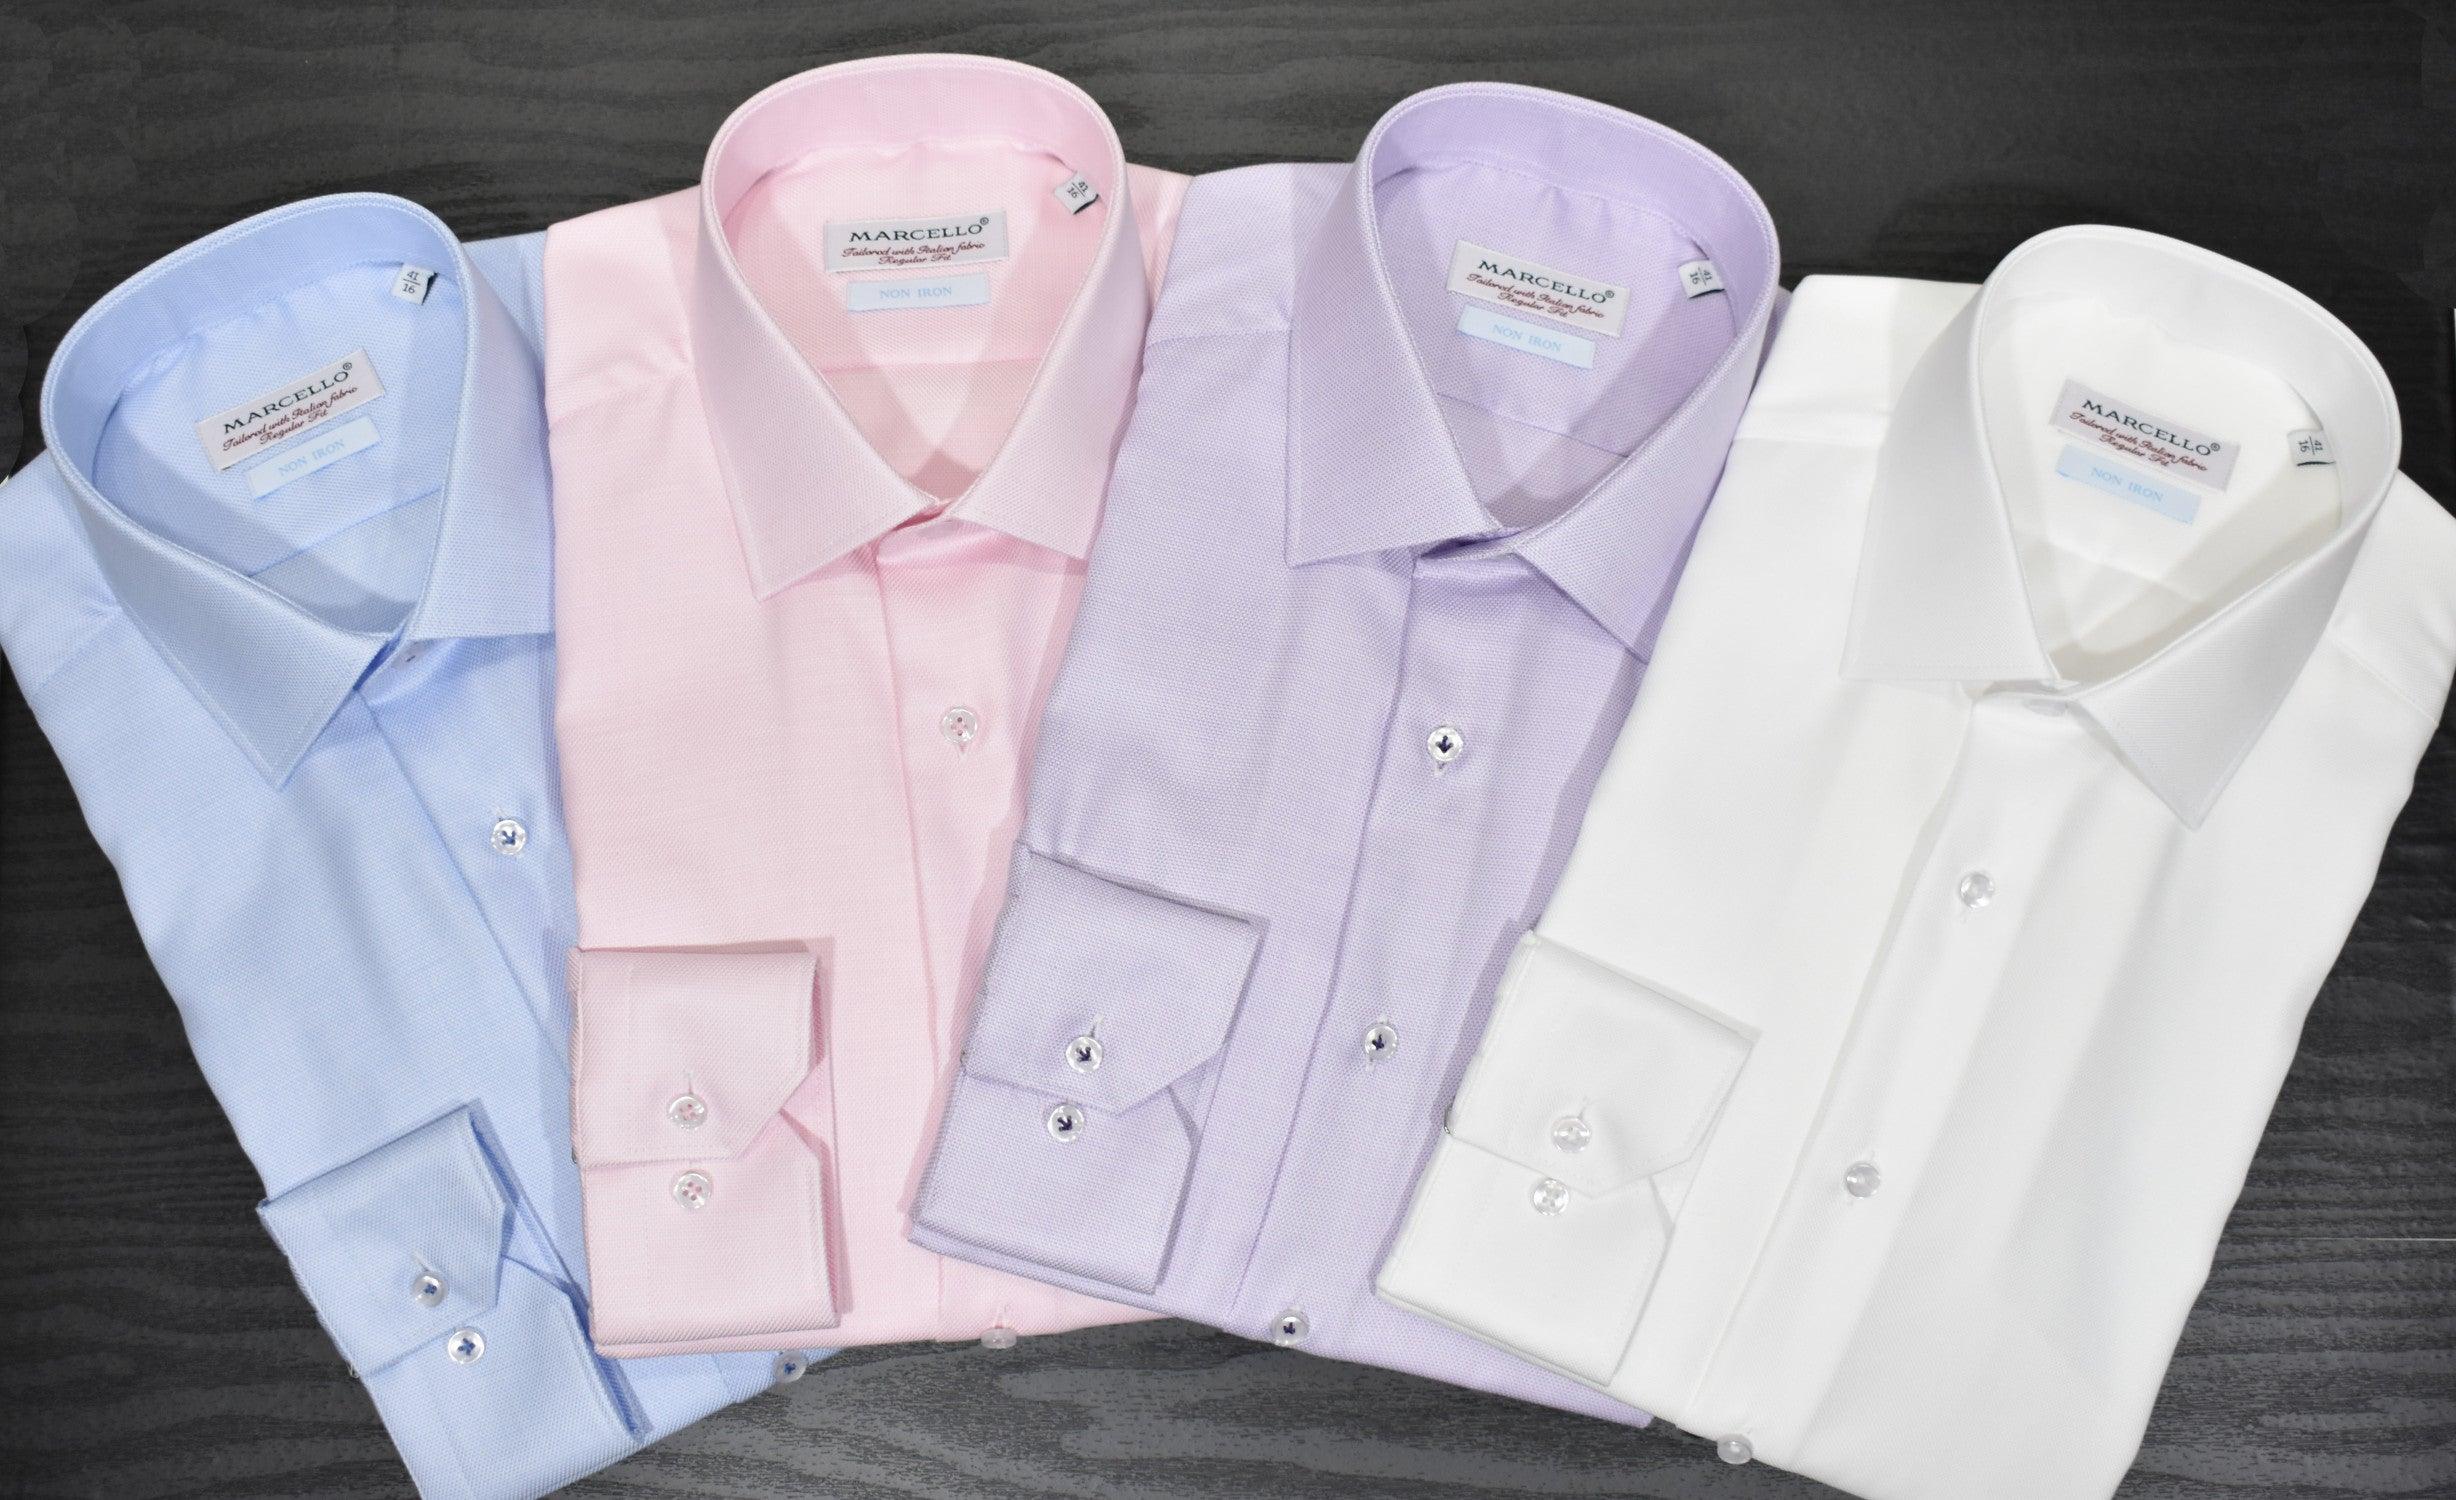 The Marcello Dress Shirt is one of the finest made shirts.  Soft, rich fabric with a slight texture exudes an unparalleled elegance.  Choose from White, Blue, Pink or Lilac Extra fine, soft Italian cotton. Fine piquet textured fabric. Non iron enhanced treatment to keep you looking perfect. Classic shaped fit. Enhanced stitch detailing. Removable collar stays and an extra set with each shirt. Imported, Turkey.